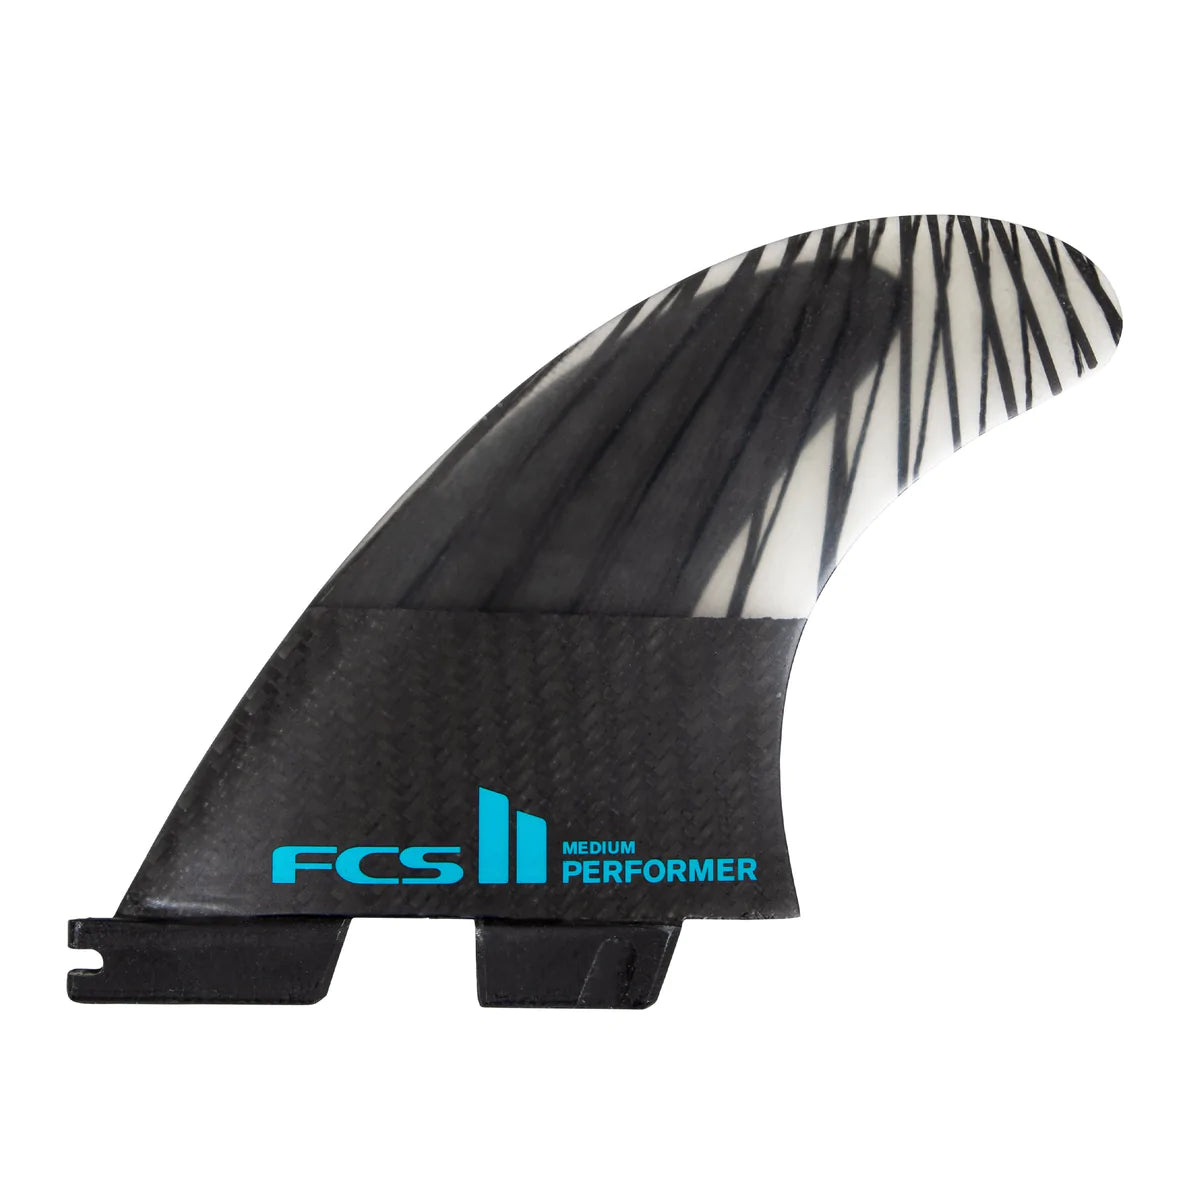 FCS II Performer Performance Core Carbon PCC Large Thruster Surfboard Fins - Teal Black